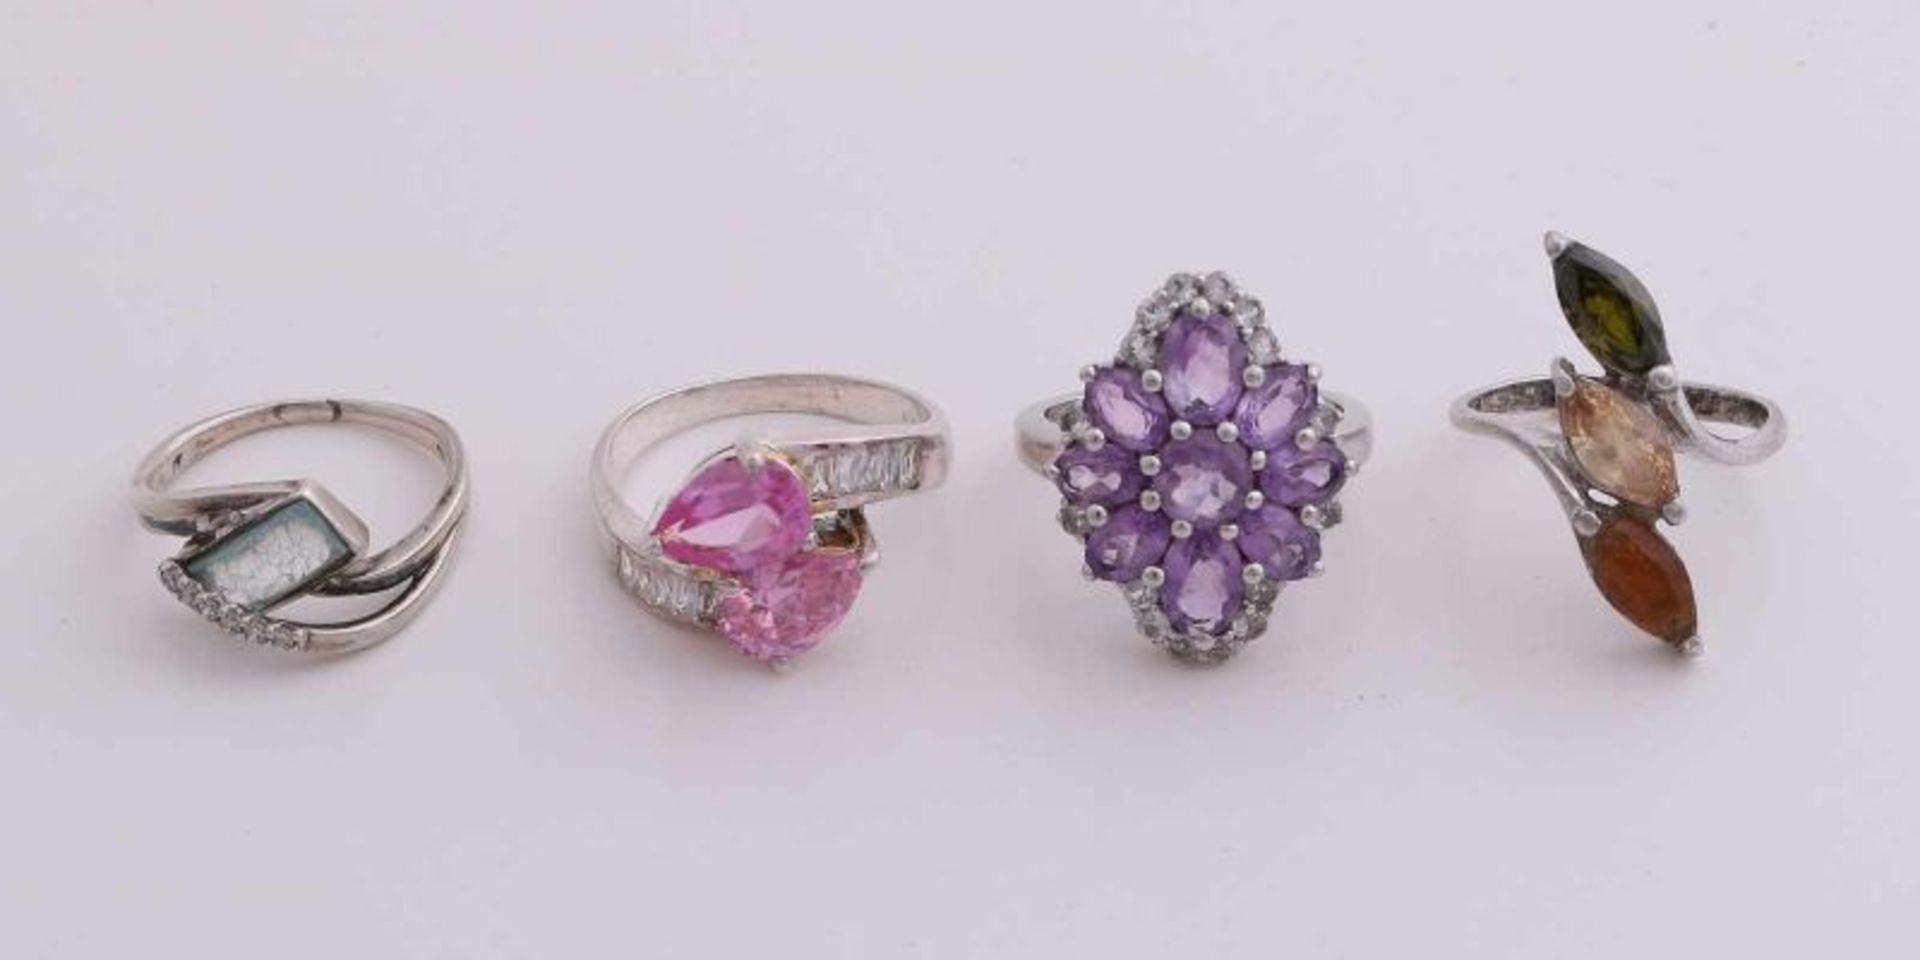 Lot 4 silver rings, 925/000, with colored zirconia. In good condition